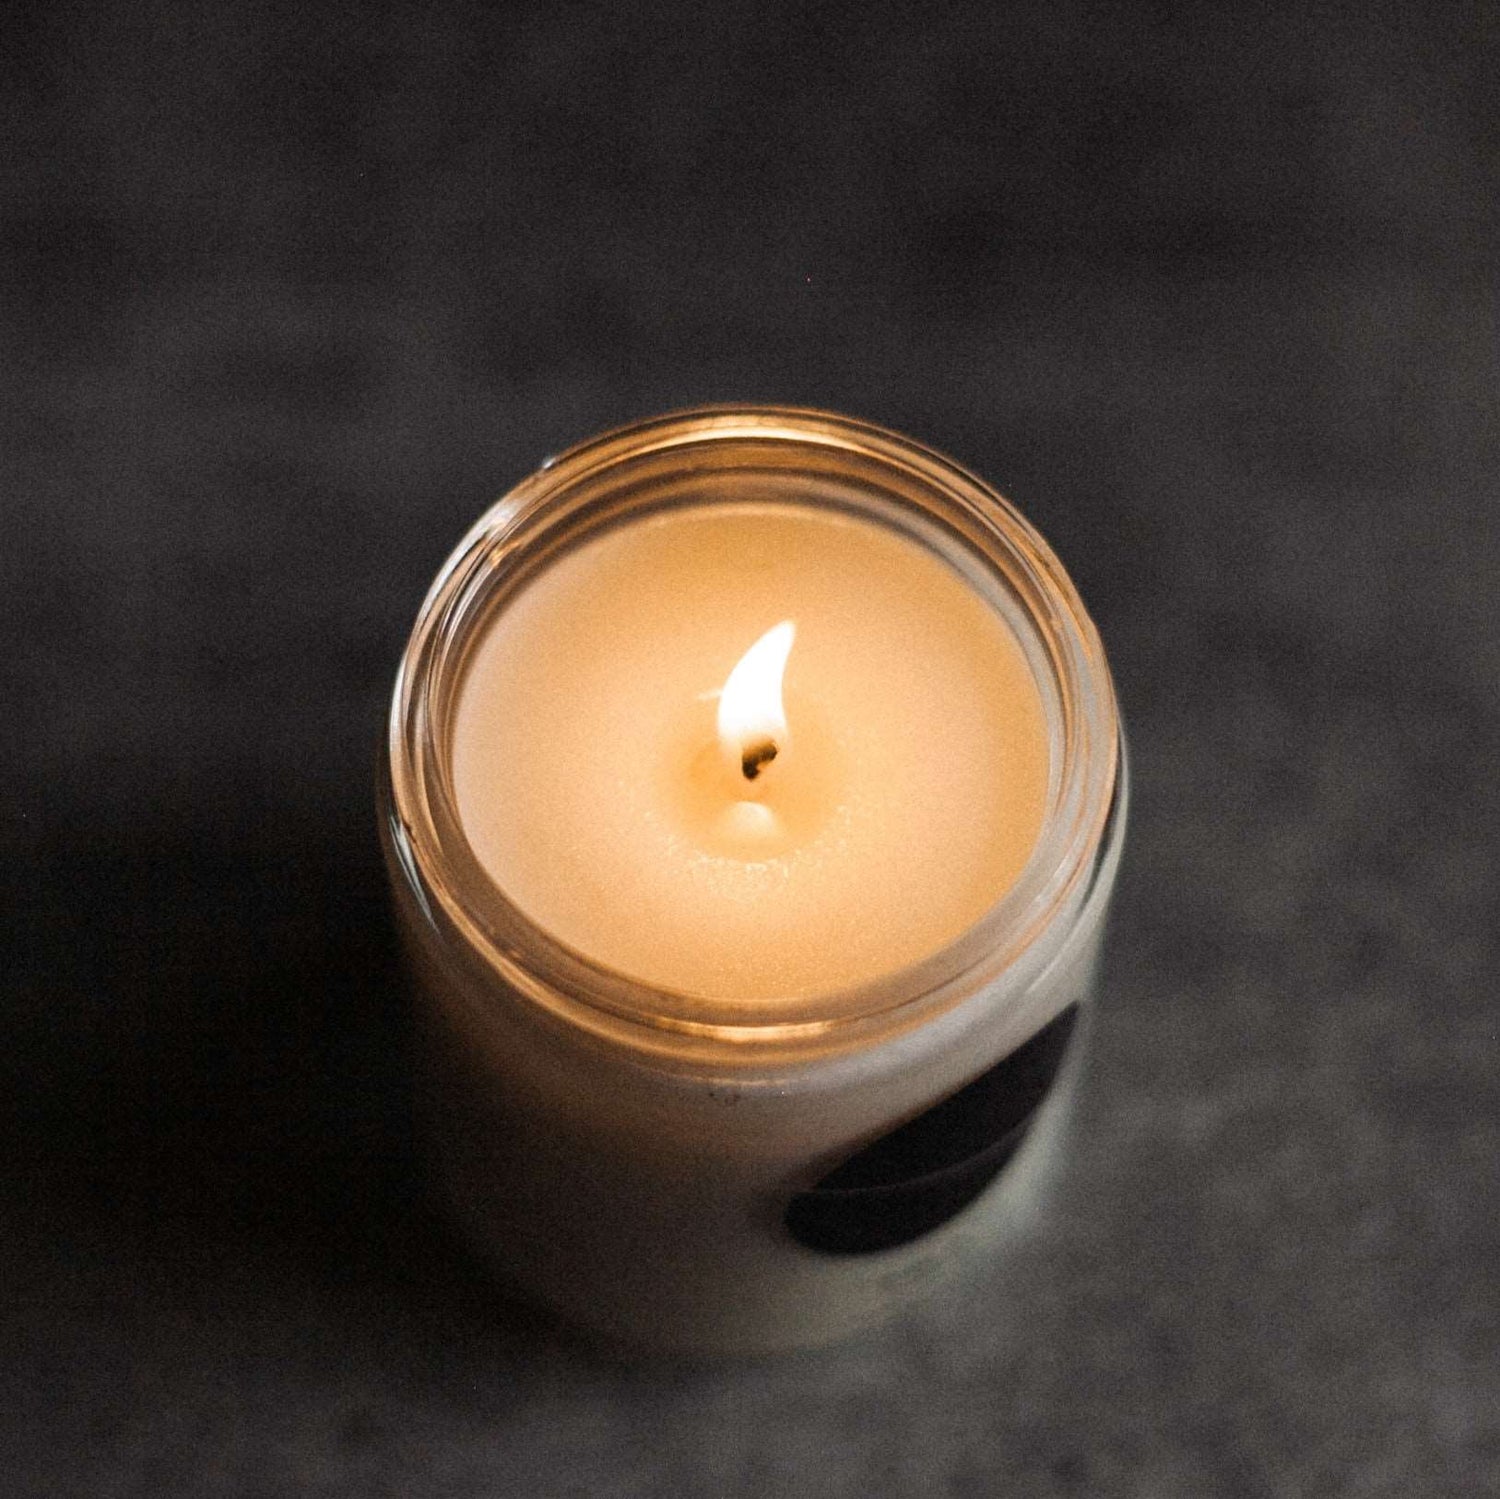 Ash Candle – Particle Goods